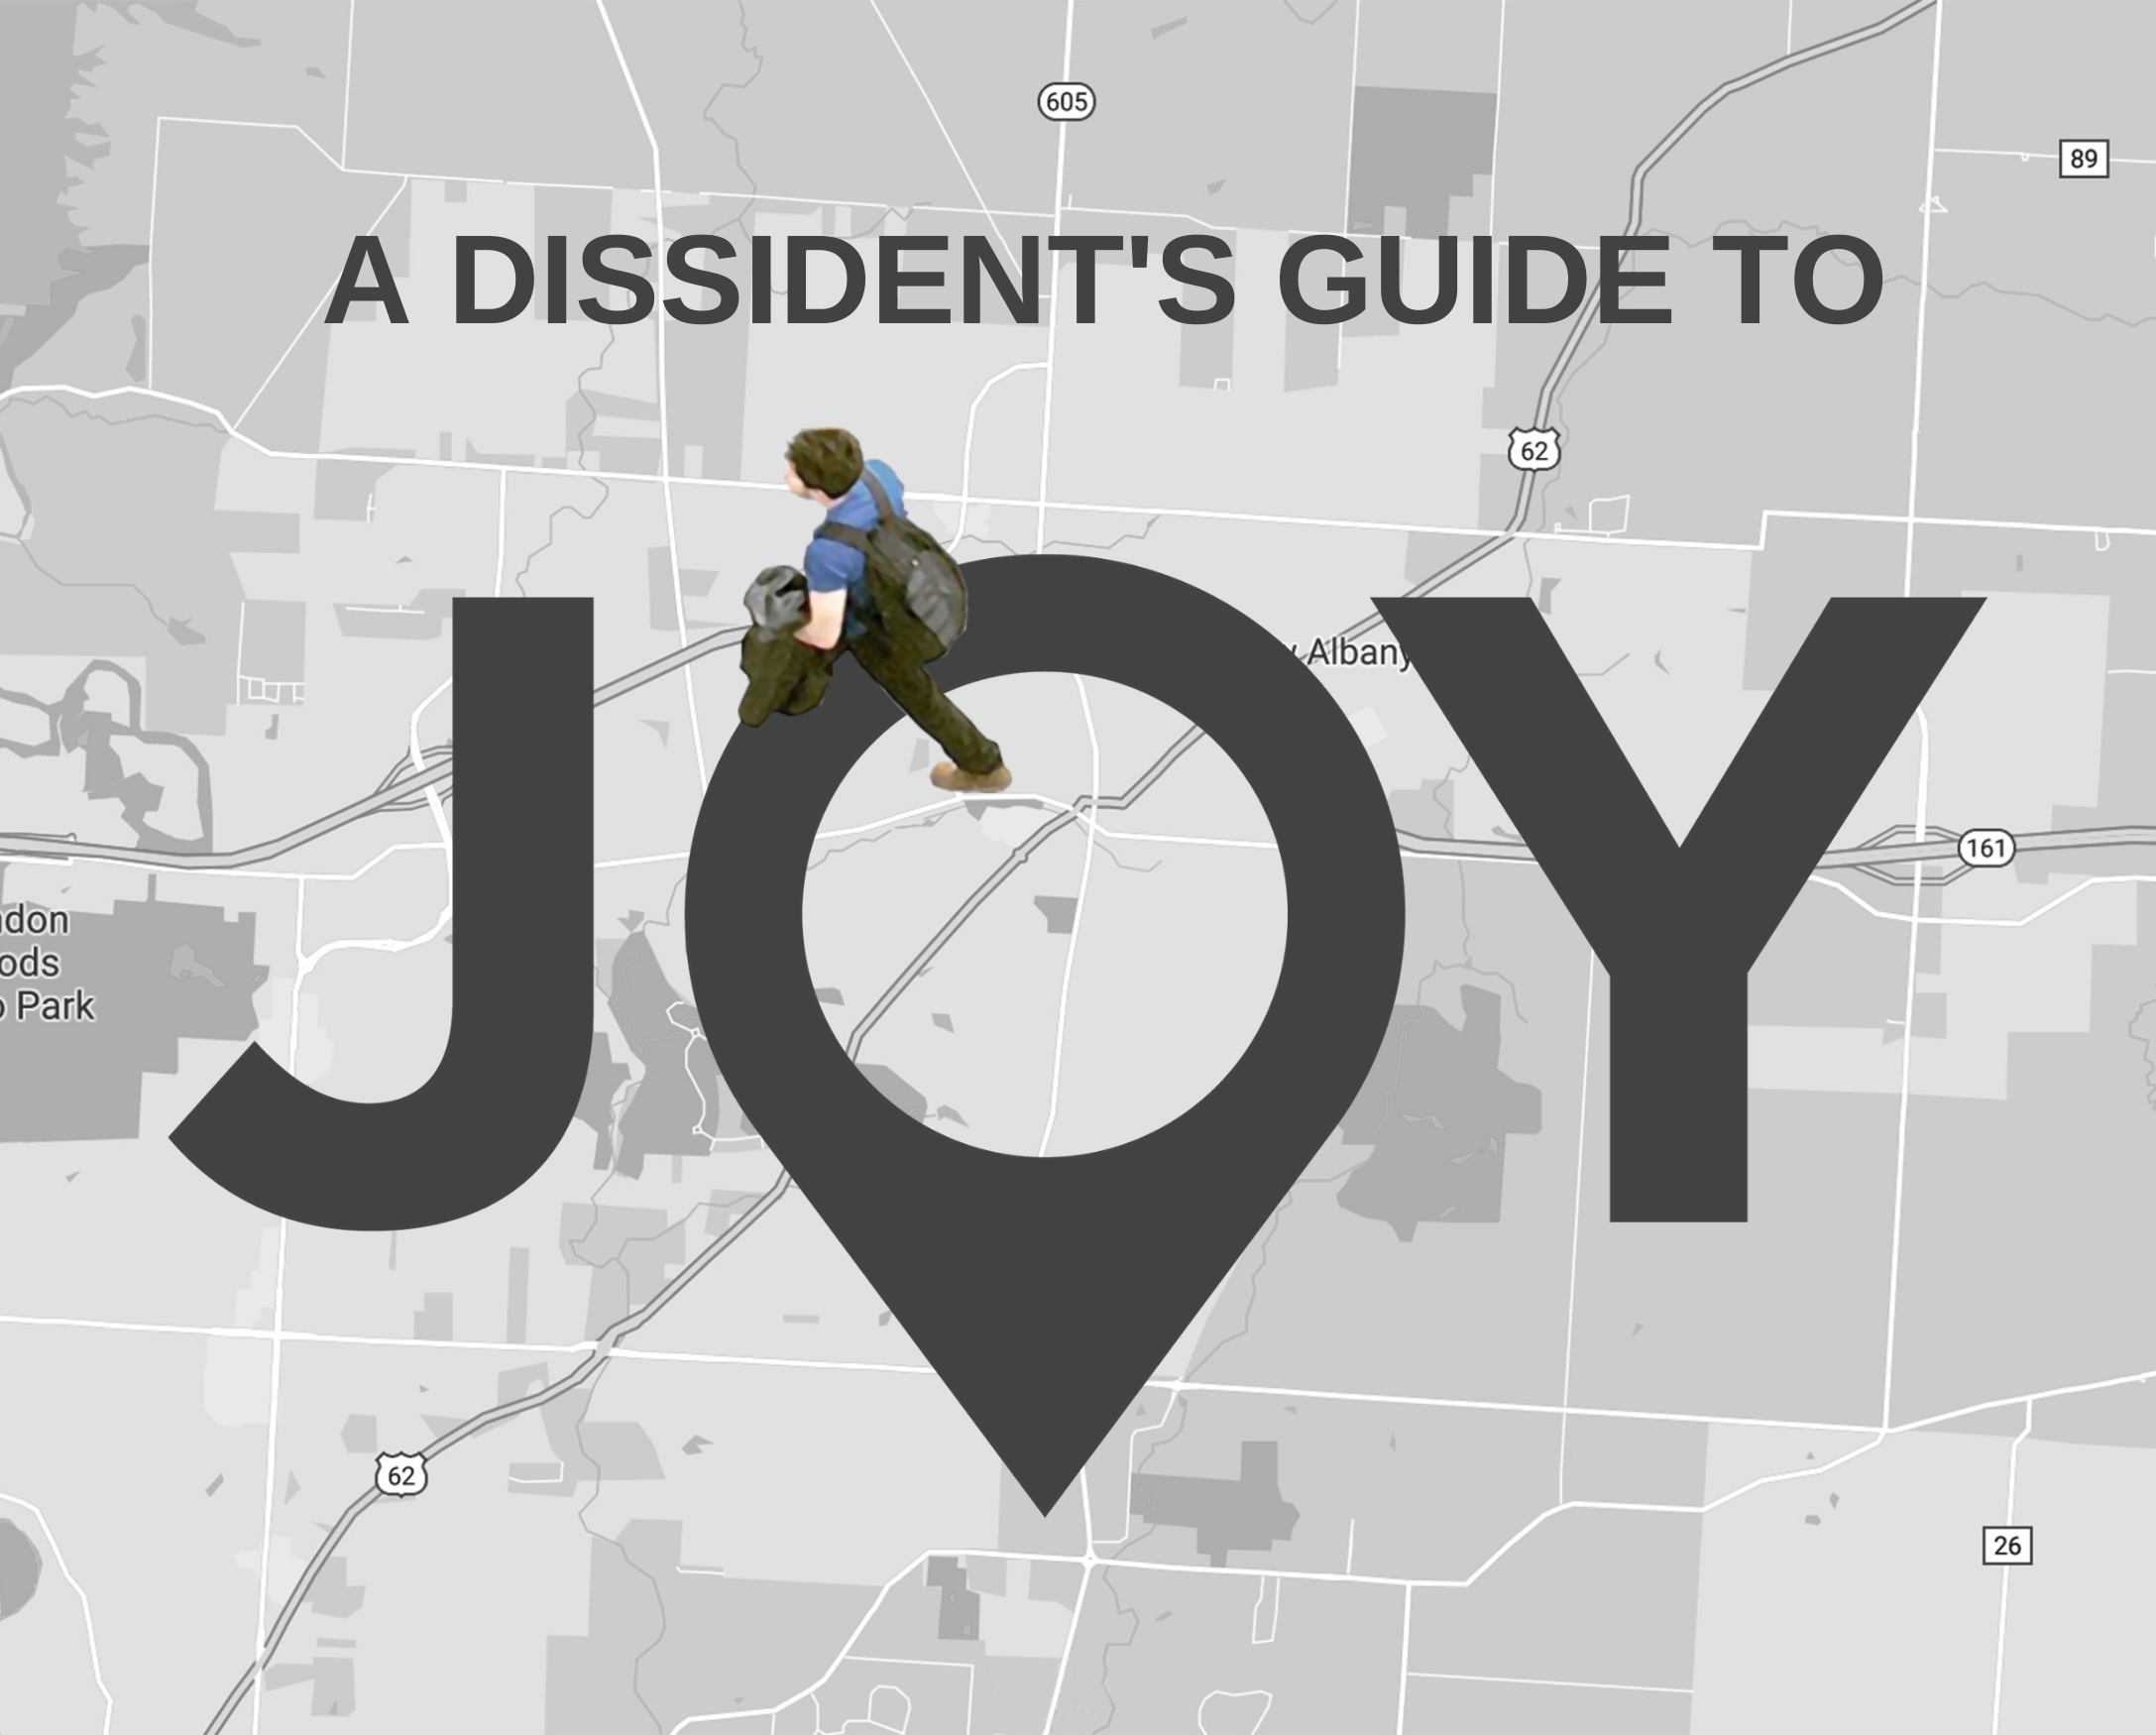 A Dissident’s Guide to Joy: Imitation on the Way to Glorification